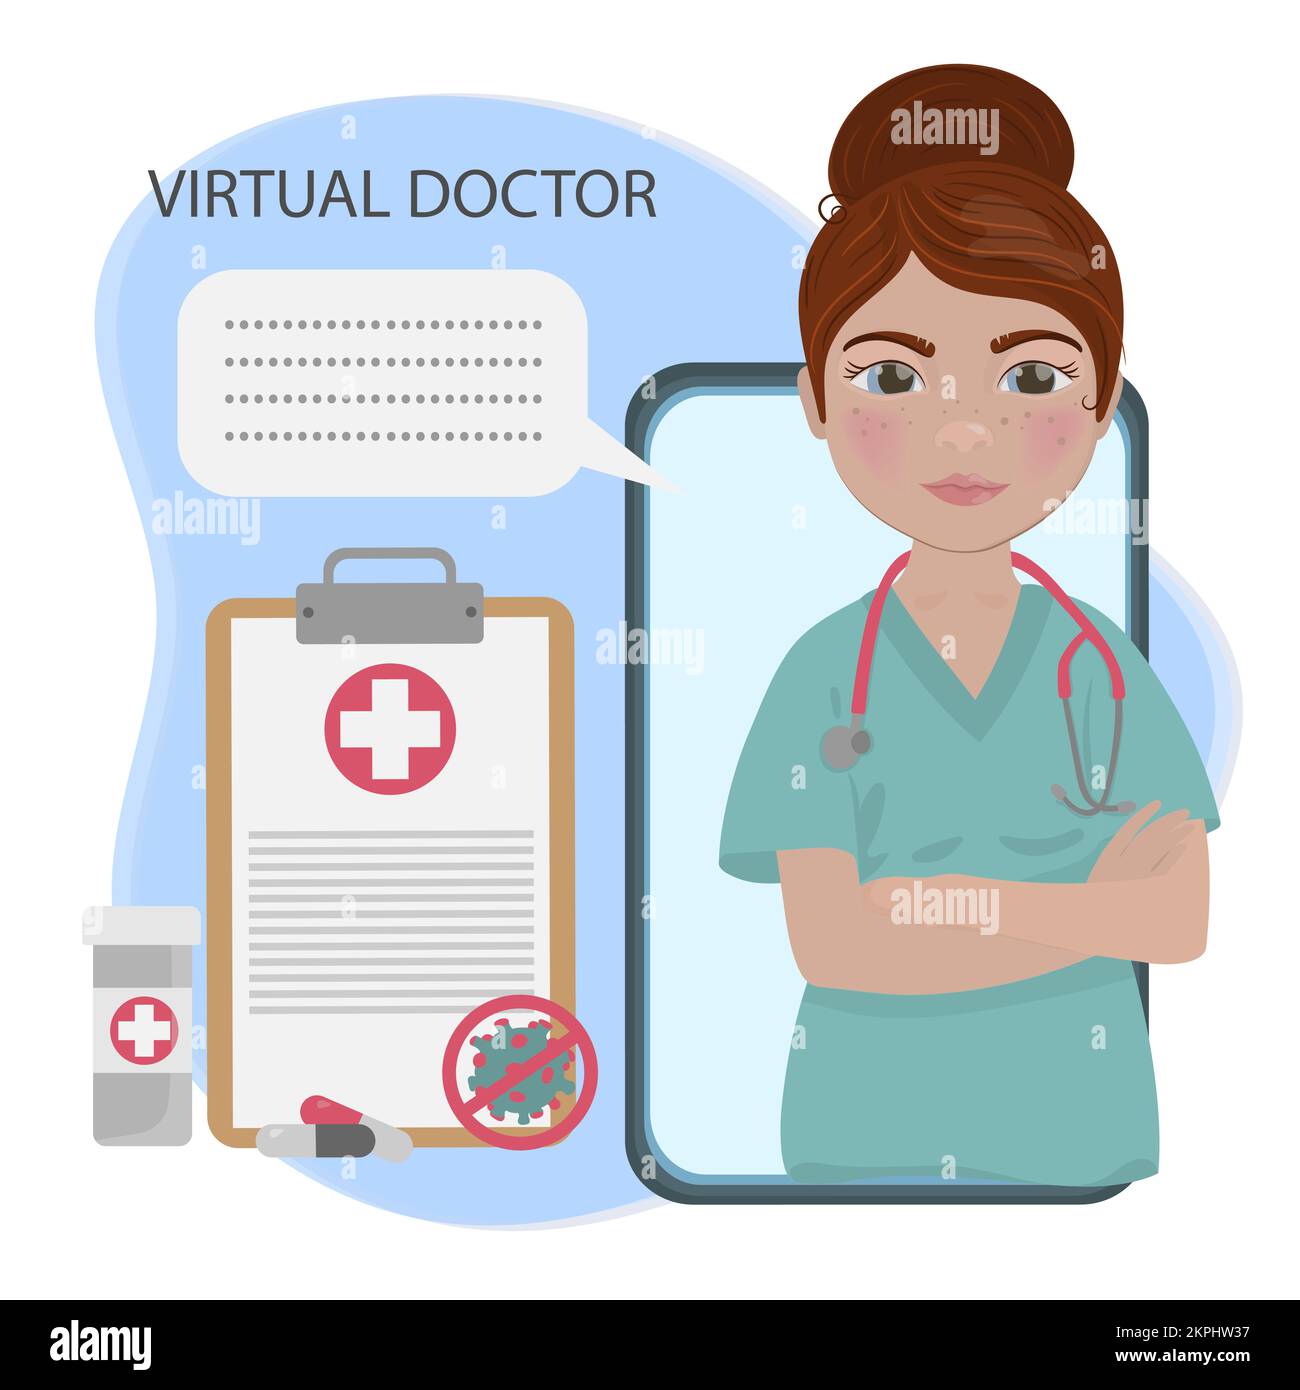 VIRTUAL CONSULTATION Woman Practicing Doctor Giving Recommendations For Disease Treatment Online Internet Cartoon Clip Art Vector Illustration Set For Stock Vector